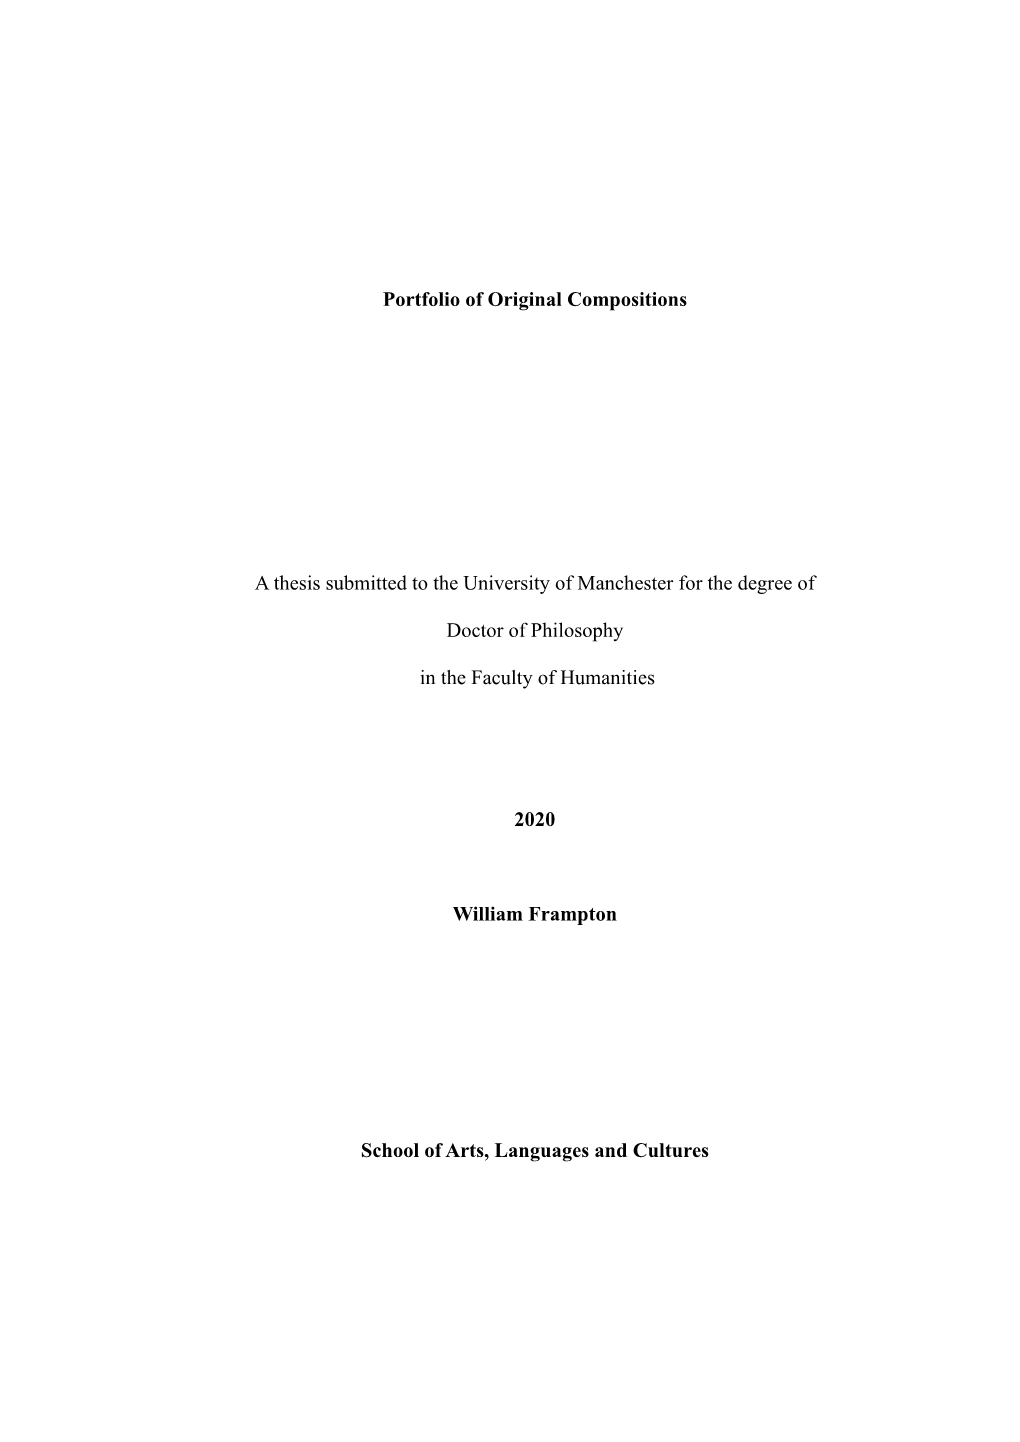 Portfolio of Original Compositions a Thesis Submitted to the University Of